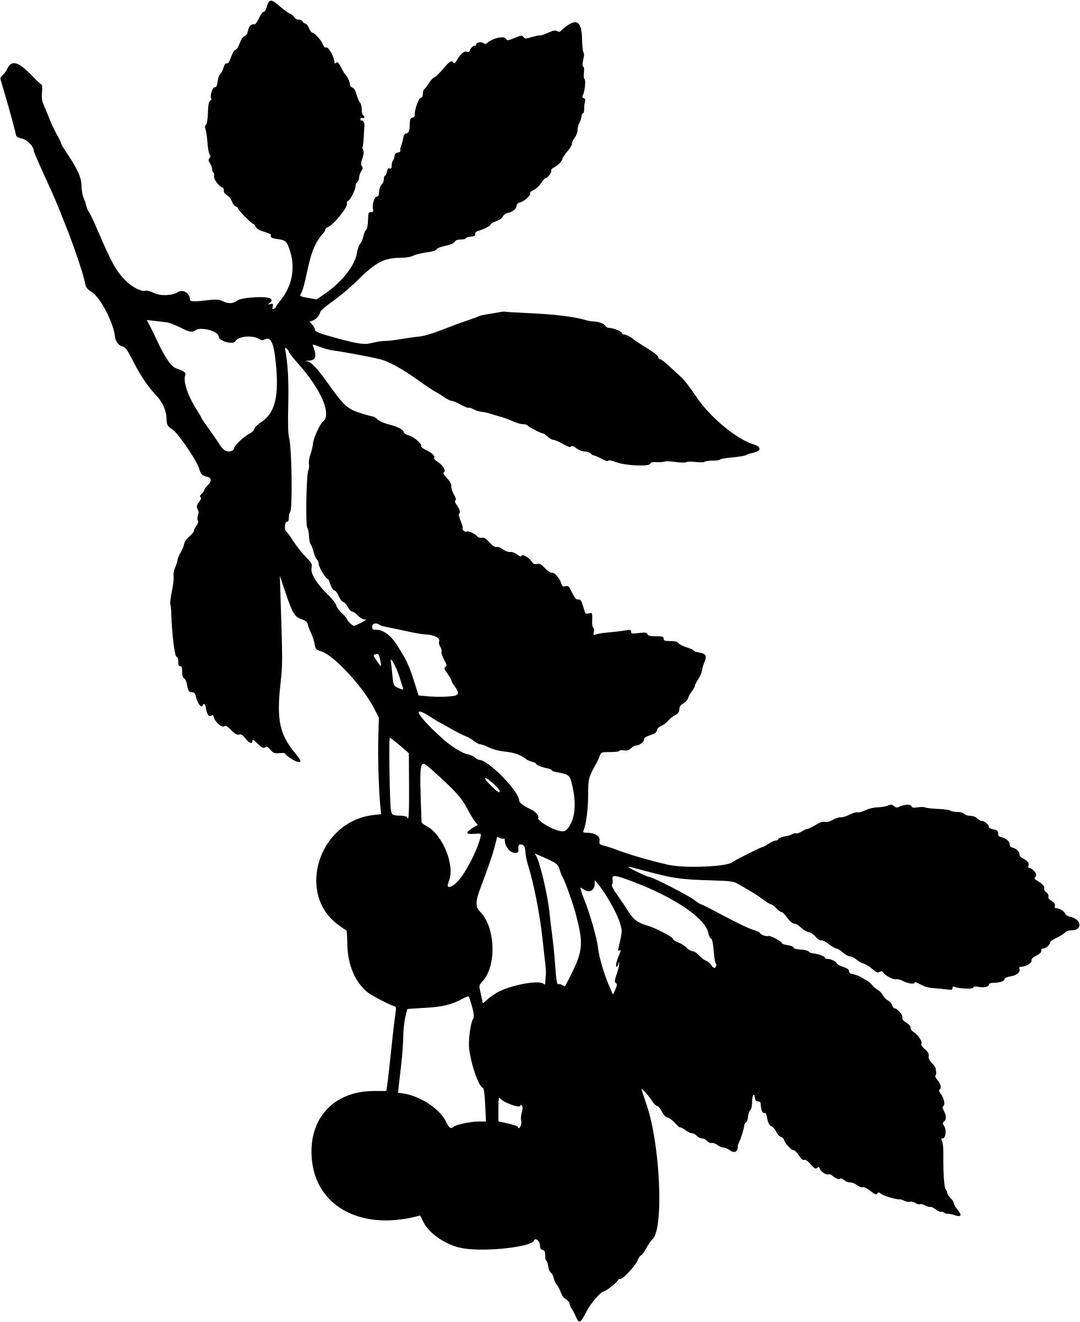 Sour cherry tree 2 (silhouette) png transparent